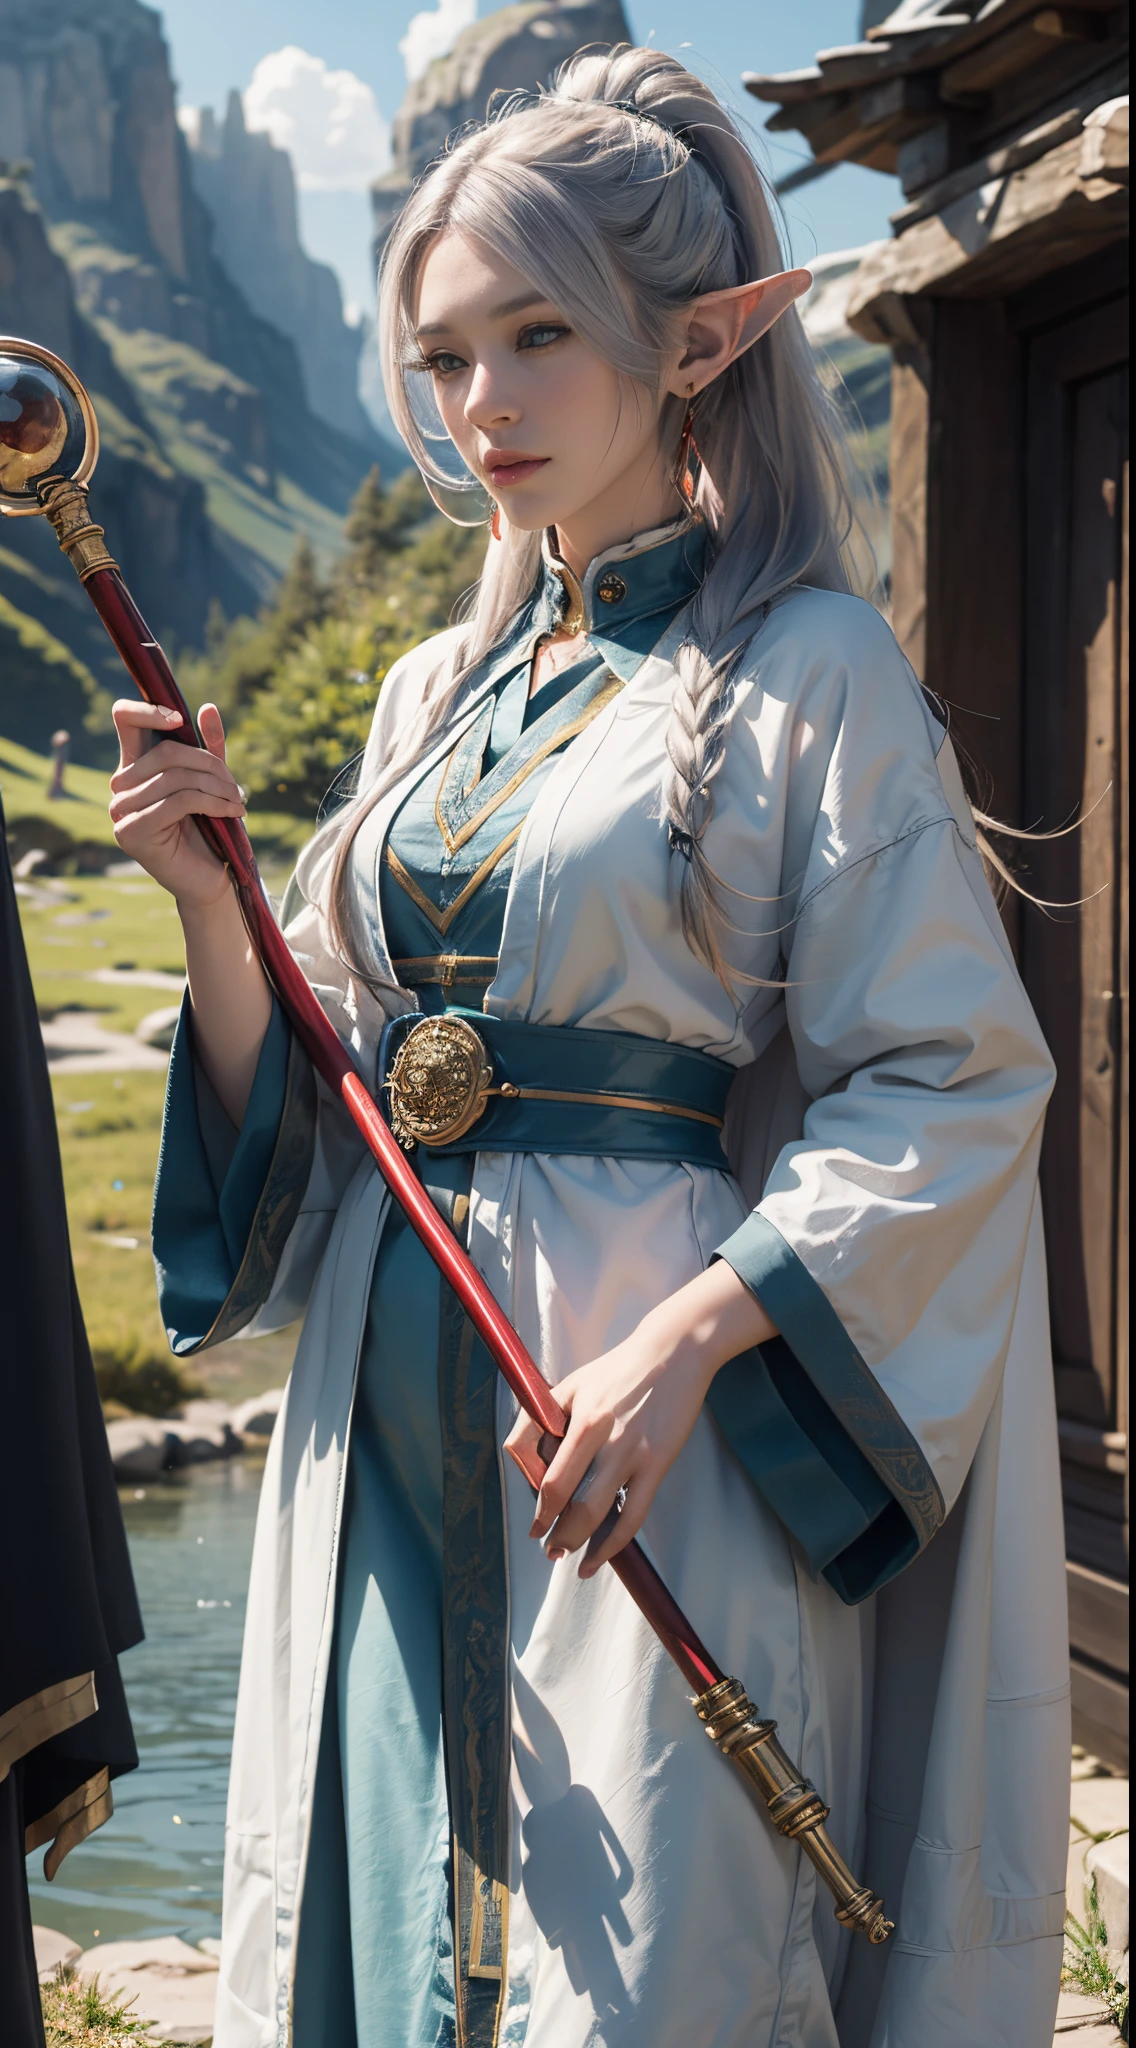 FrierenWinter, 8k, best quality, highres, realistic, real person, A wizard character with silver ponytail hair, earrings, and a shorter stature. The wizard is holding a luxurious, ornately decorated staff but is not wearing a hat. Their outfit is a blend of traditional wizard robes and contemporary magical attire, rich in detail and color. The character's expression is wise and confident, reflecting their mastery in magic. The background is a mystical setting, with elements of magic and fantasy.